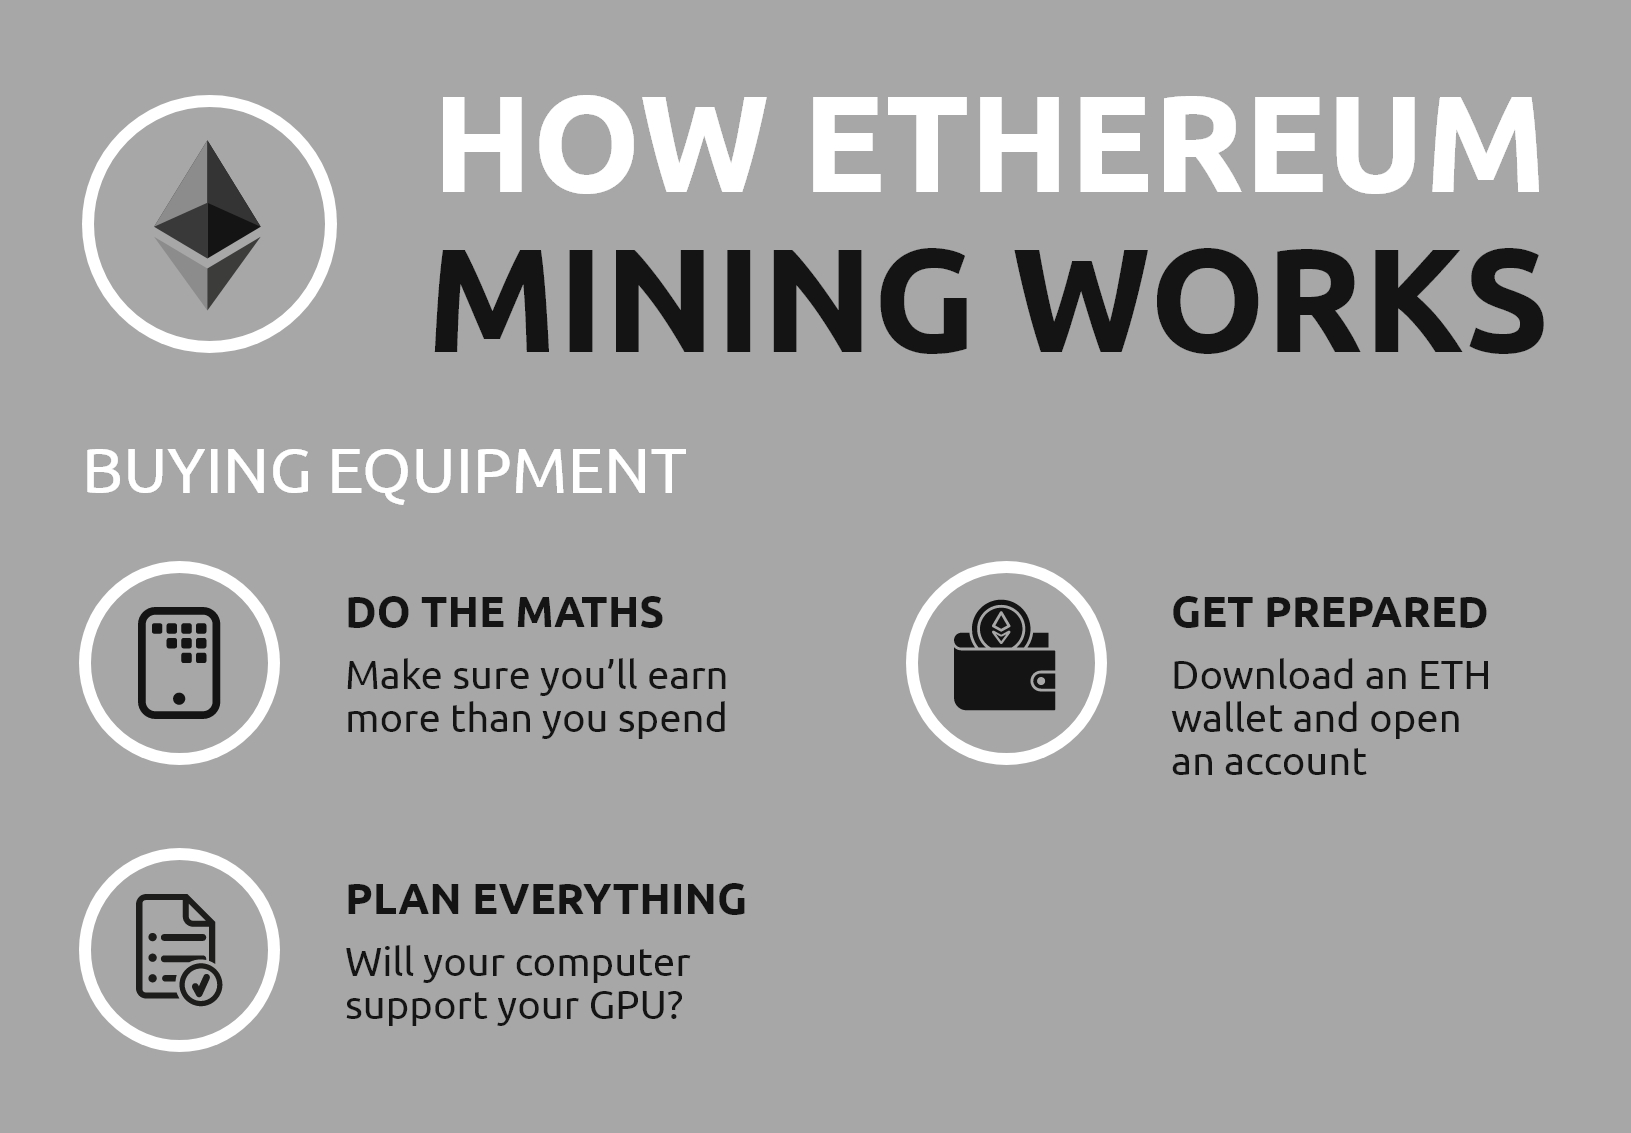 What is ethereum mining and how does it work btc to moreno